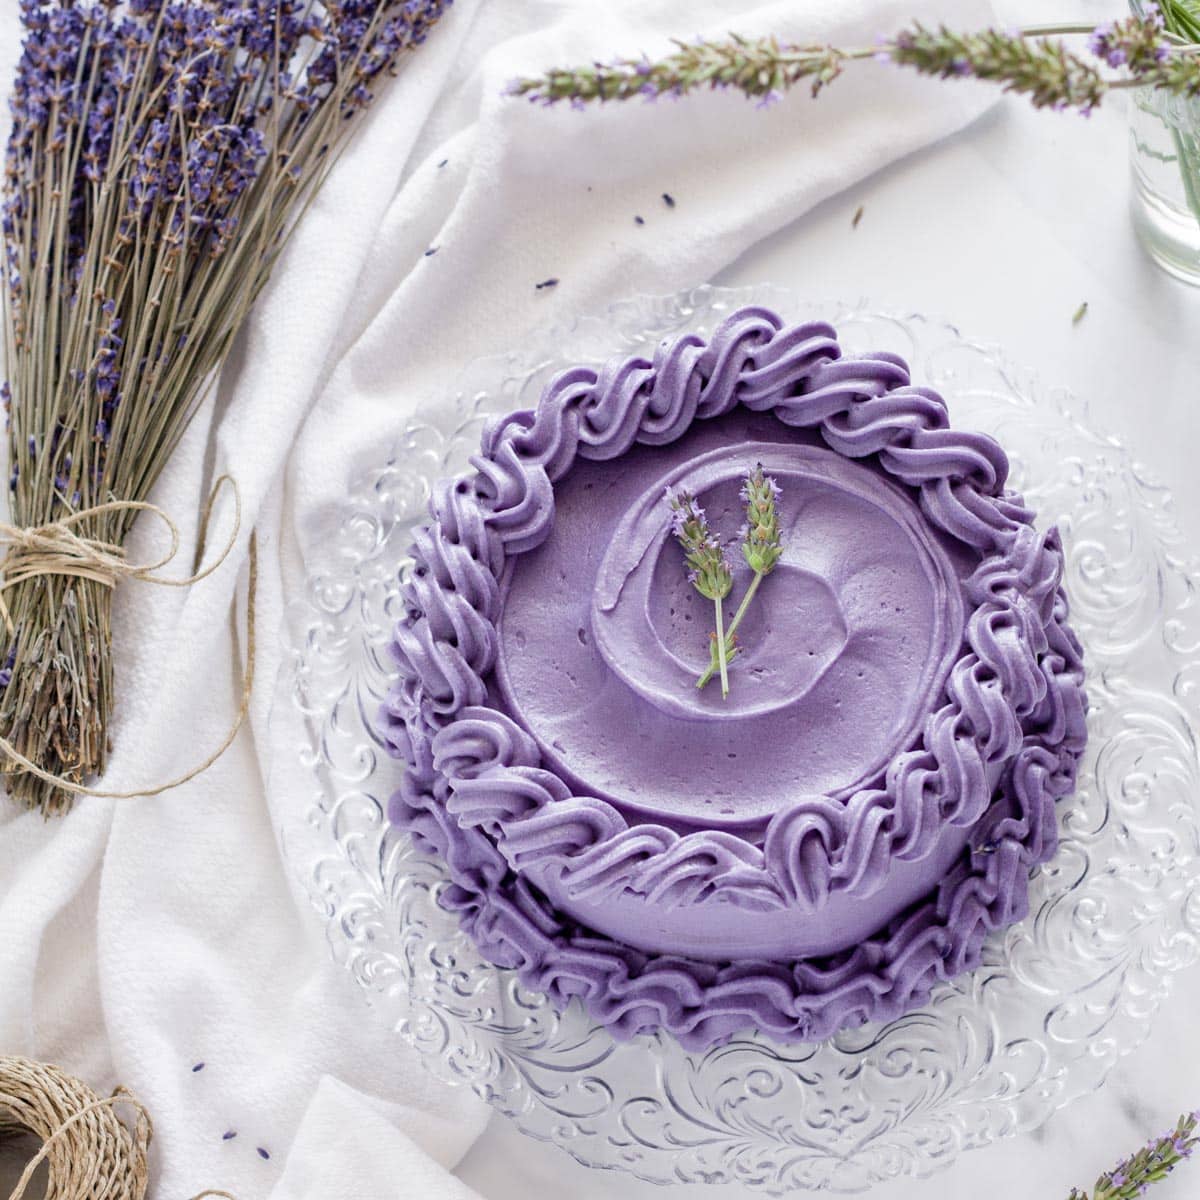 earl grey lavender cake on a white surface with lavender flowers